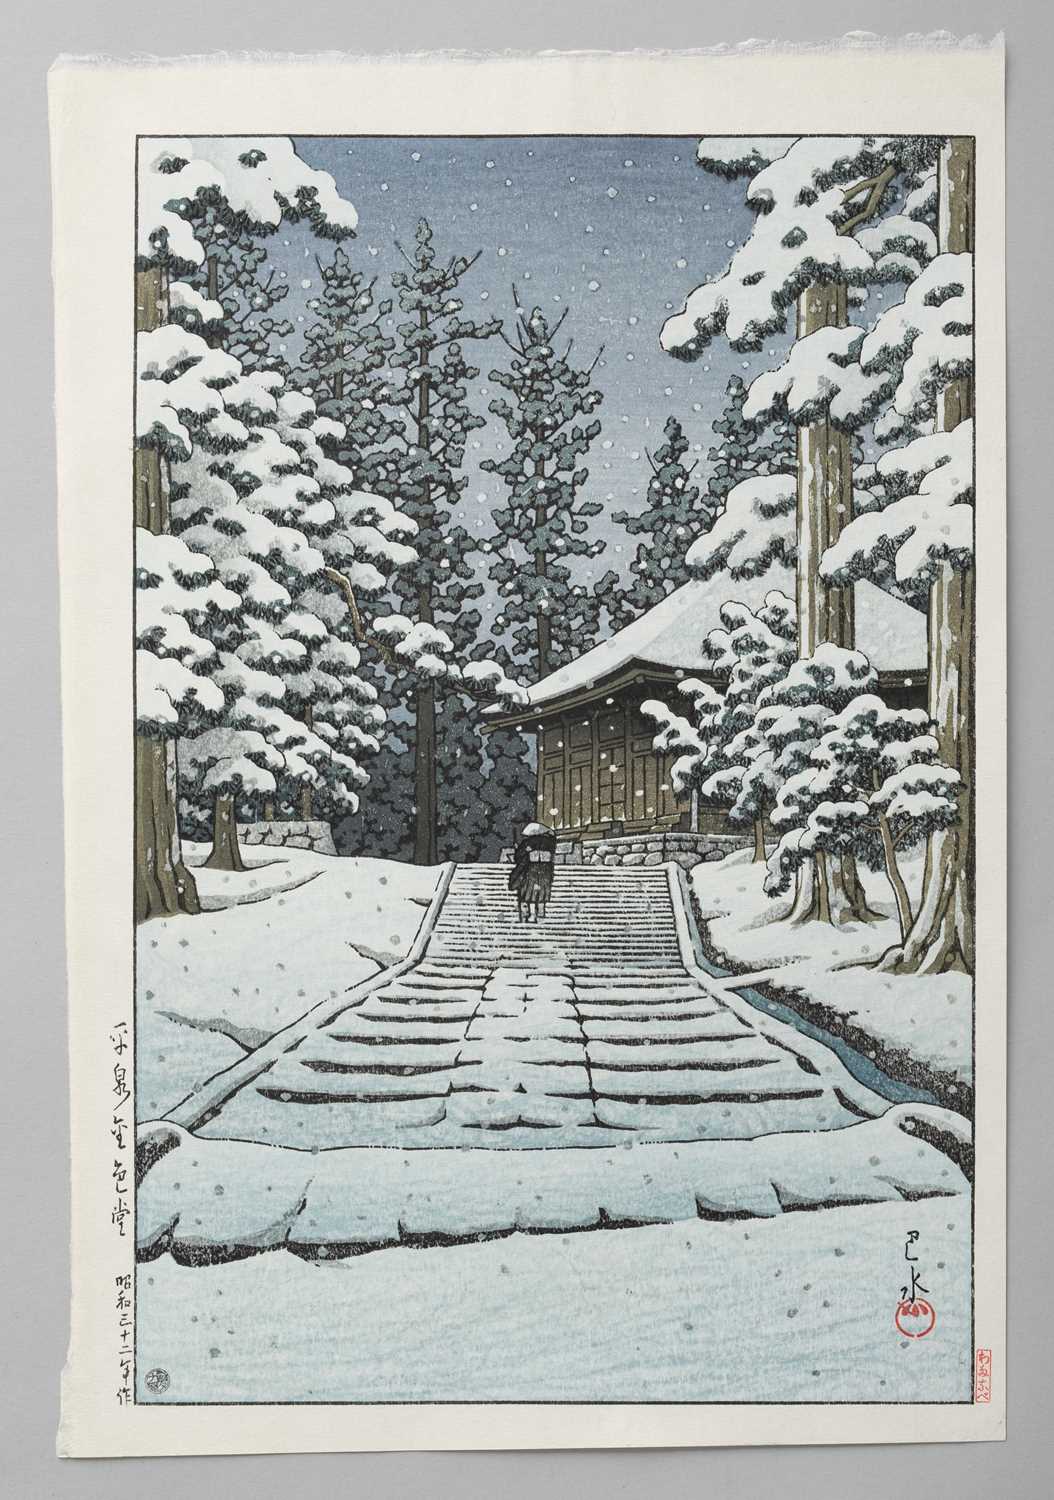 AFTER KAWASE HASUI (1883-1957) SNOW SCENES HEISEI ERA, 20TH/21ST CENTURY Two Japanese woodblock - Image 2 of 2